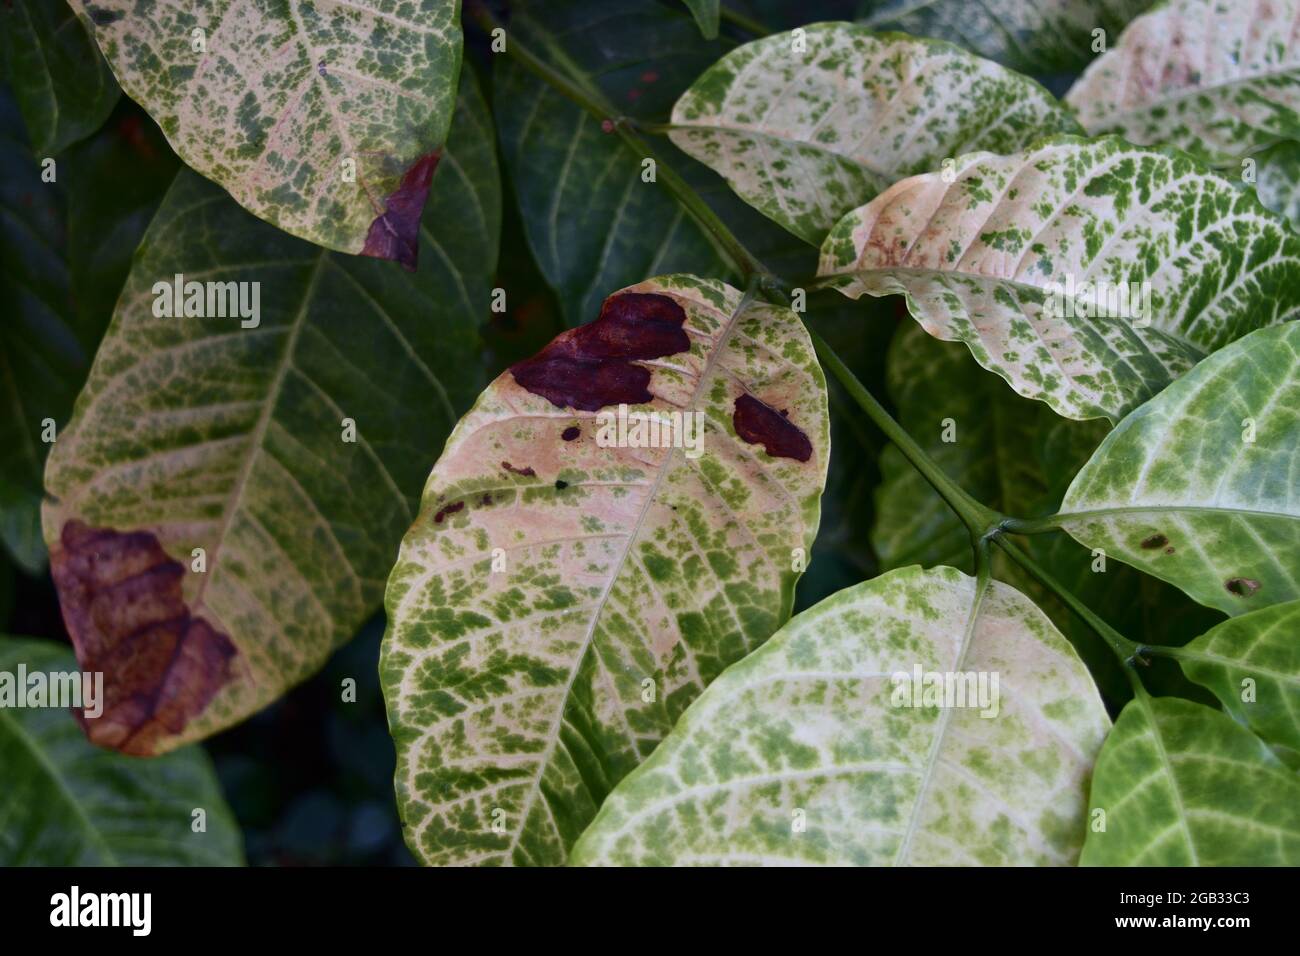 Brown and yellow damage by anthracnose on the green leaf of Robusta coffee plant tree, Plant diseases that damage agriculture Stock Photo